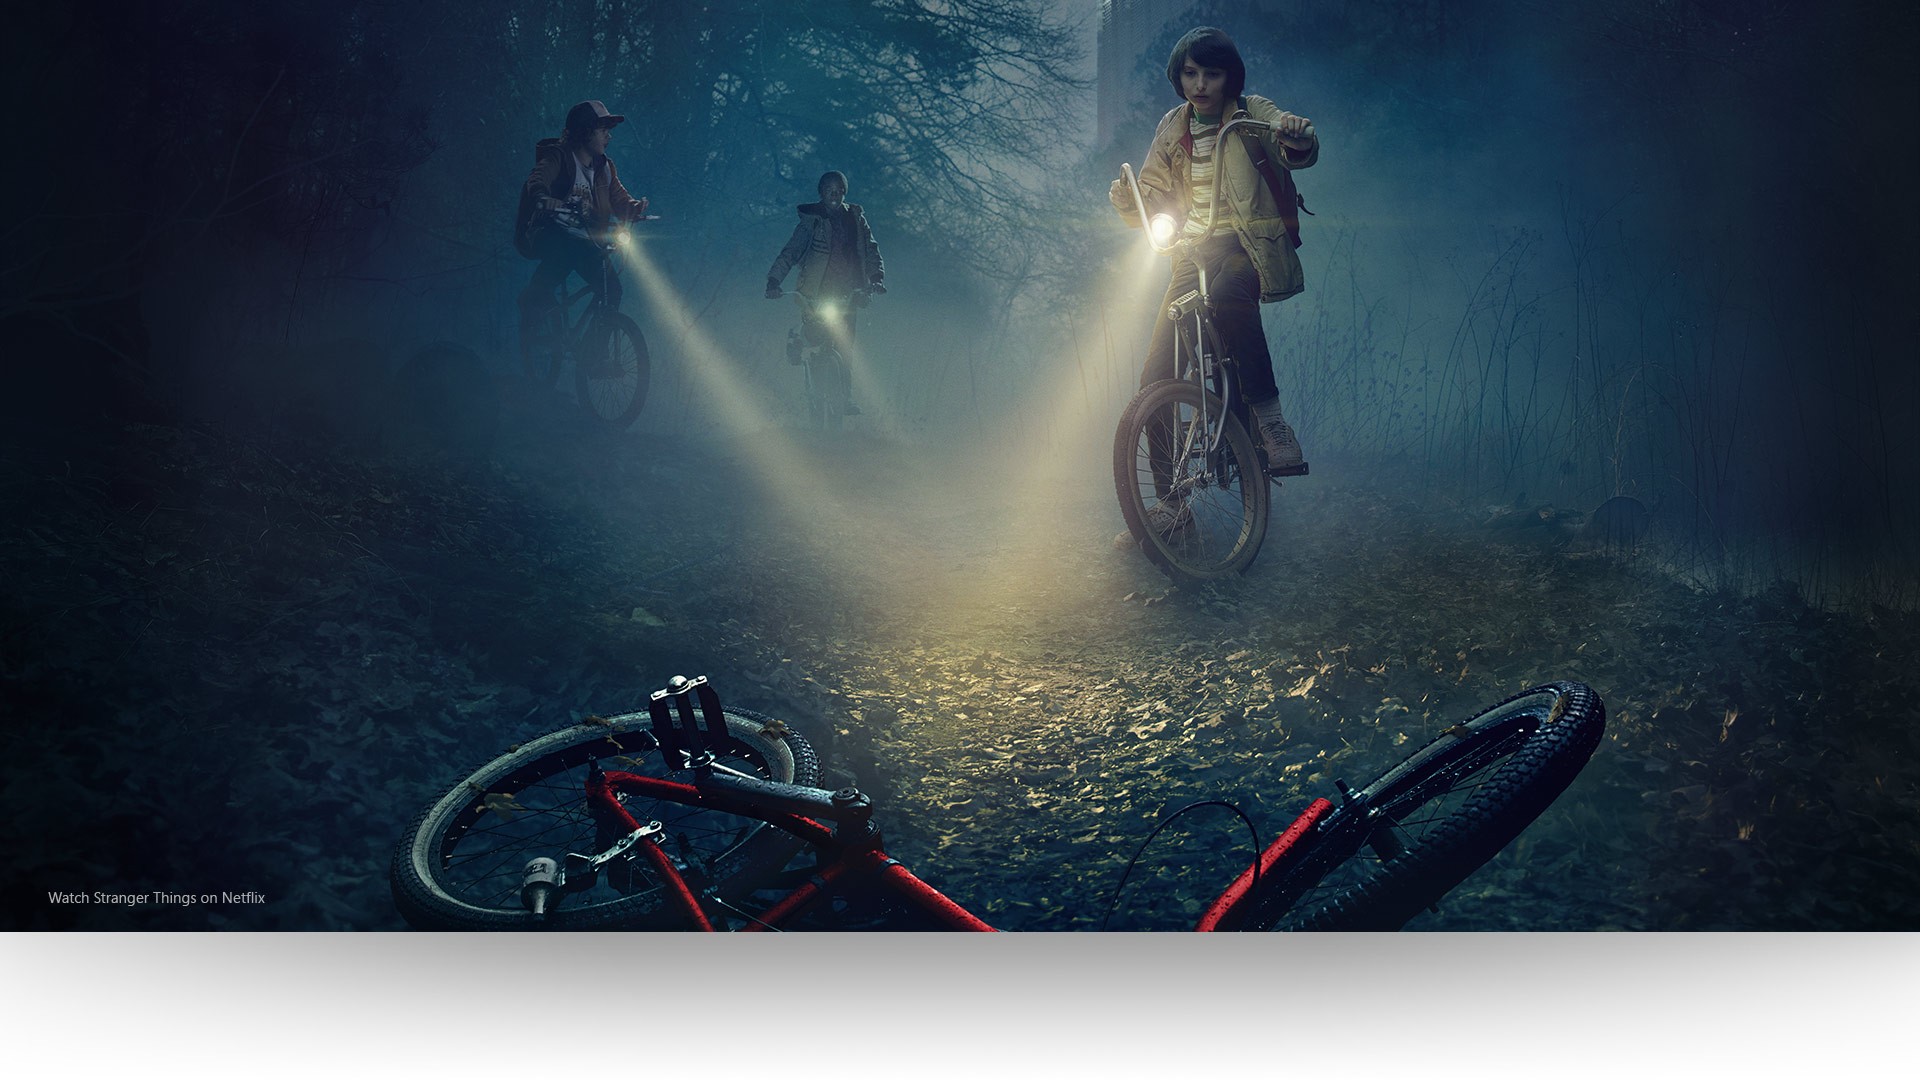 Stranger Things – Dustin, Lucas and Mike shine their lights on an abandoned bicycle on a gloomy forest path. Watch Stranger Things on Netflix.